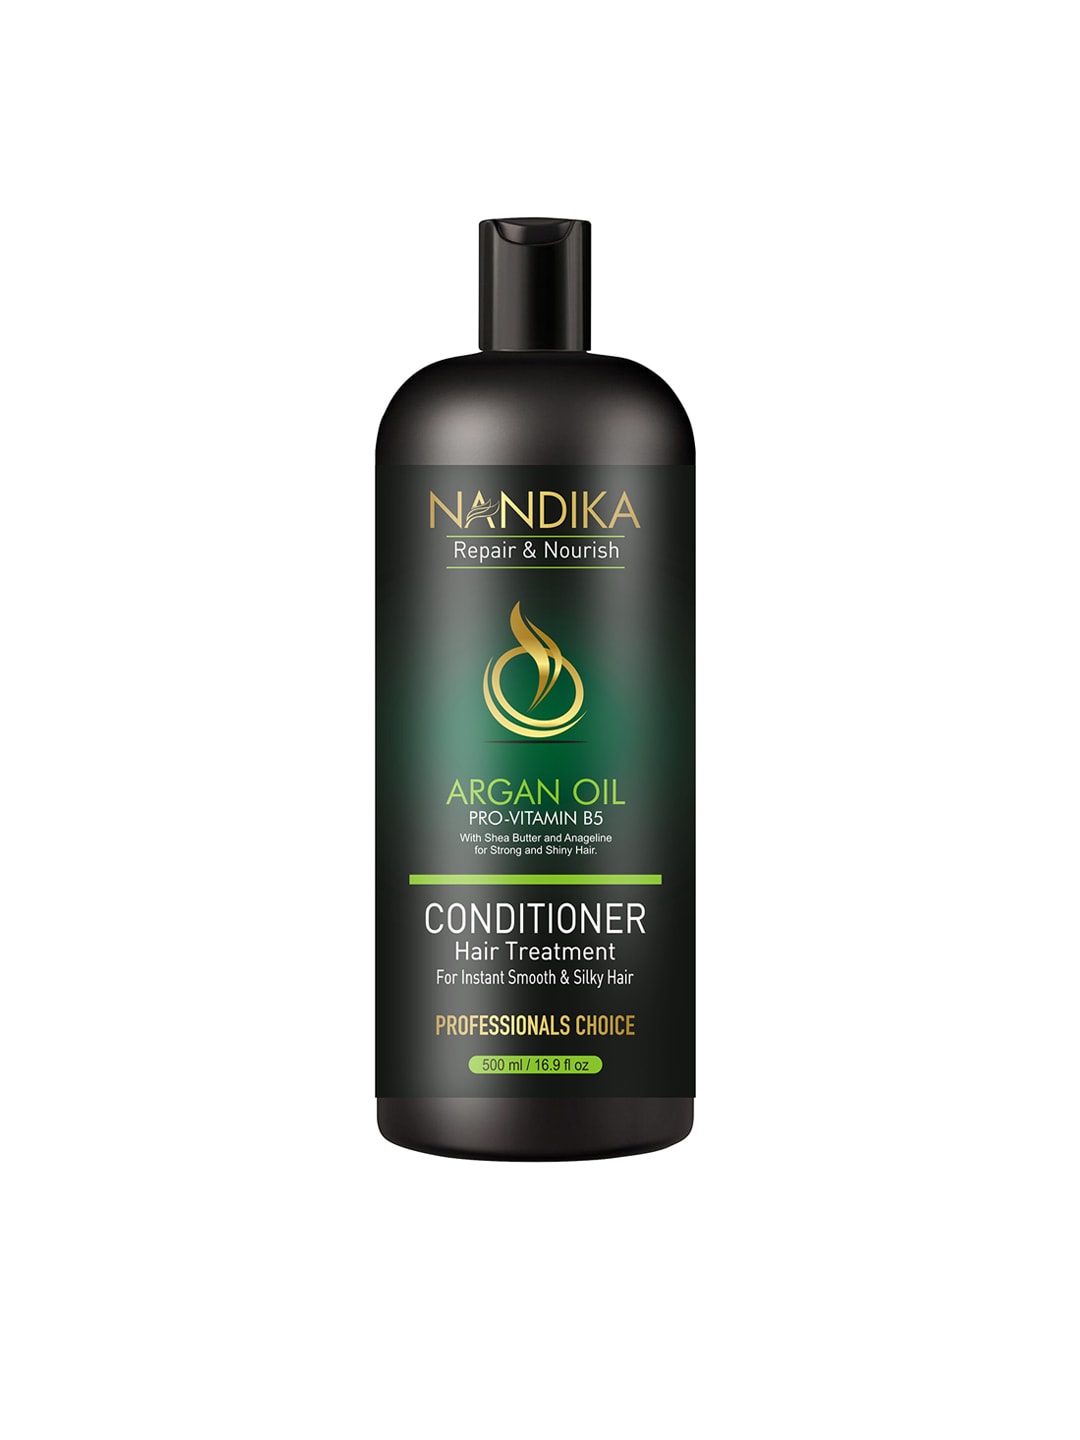 NANDIKA BEAUTY Repair & Nourish Argan Oil Conditioner with Shea Butter 500 ml Price in India